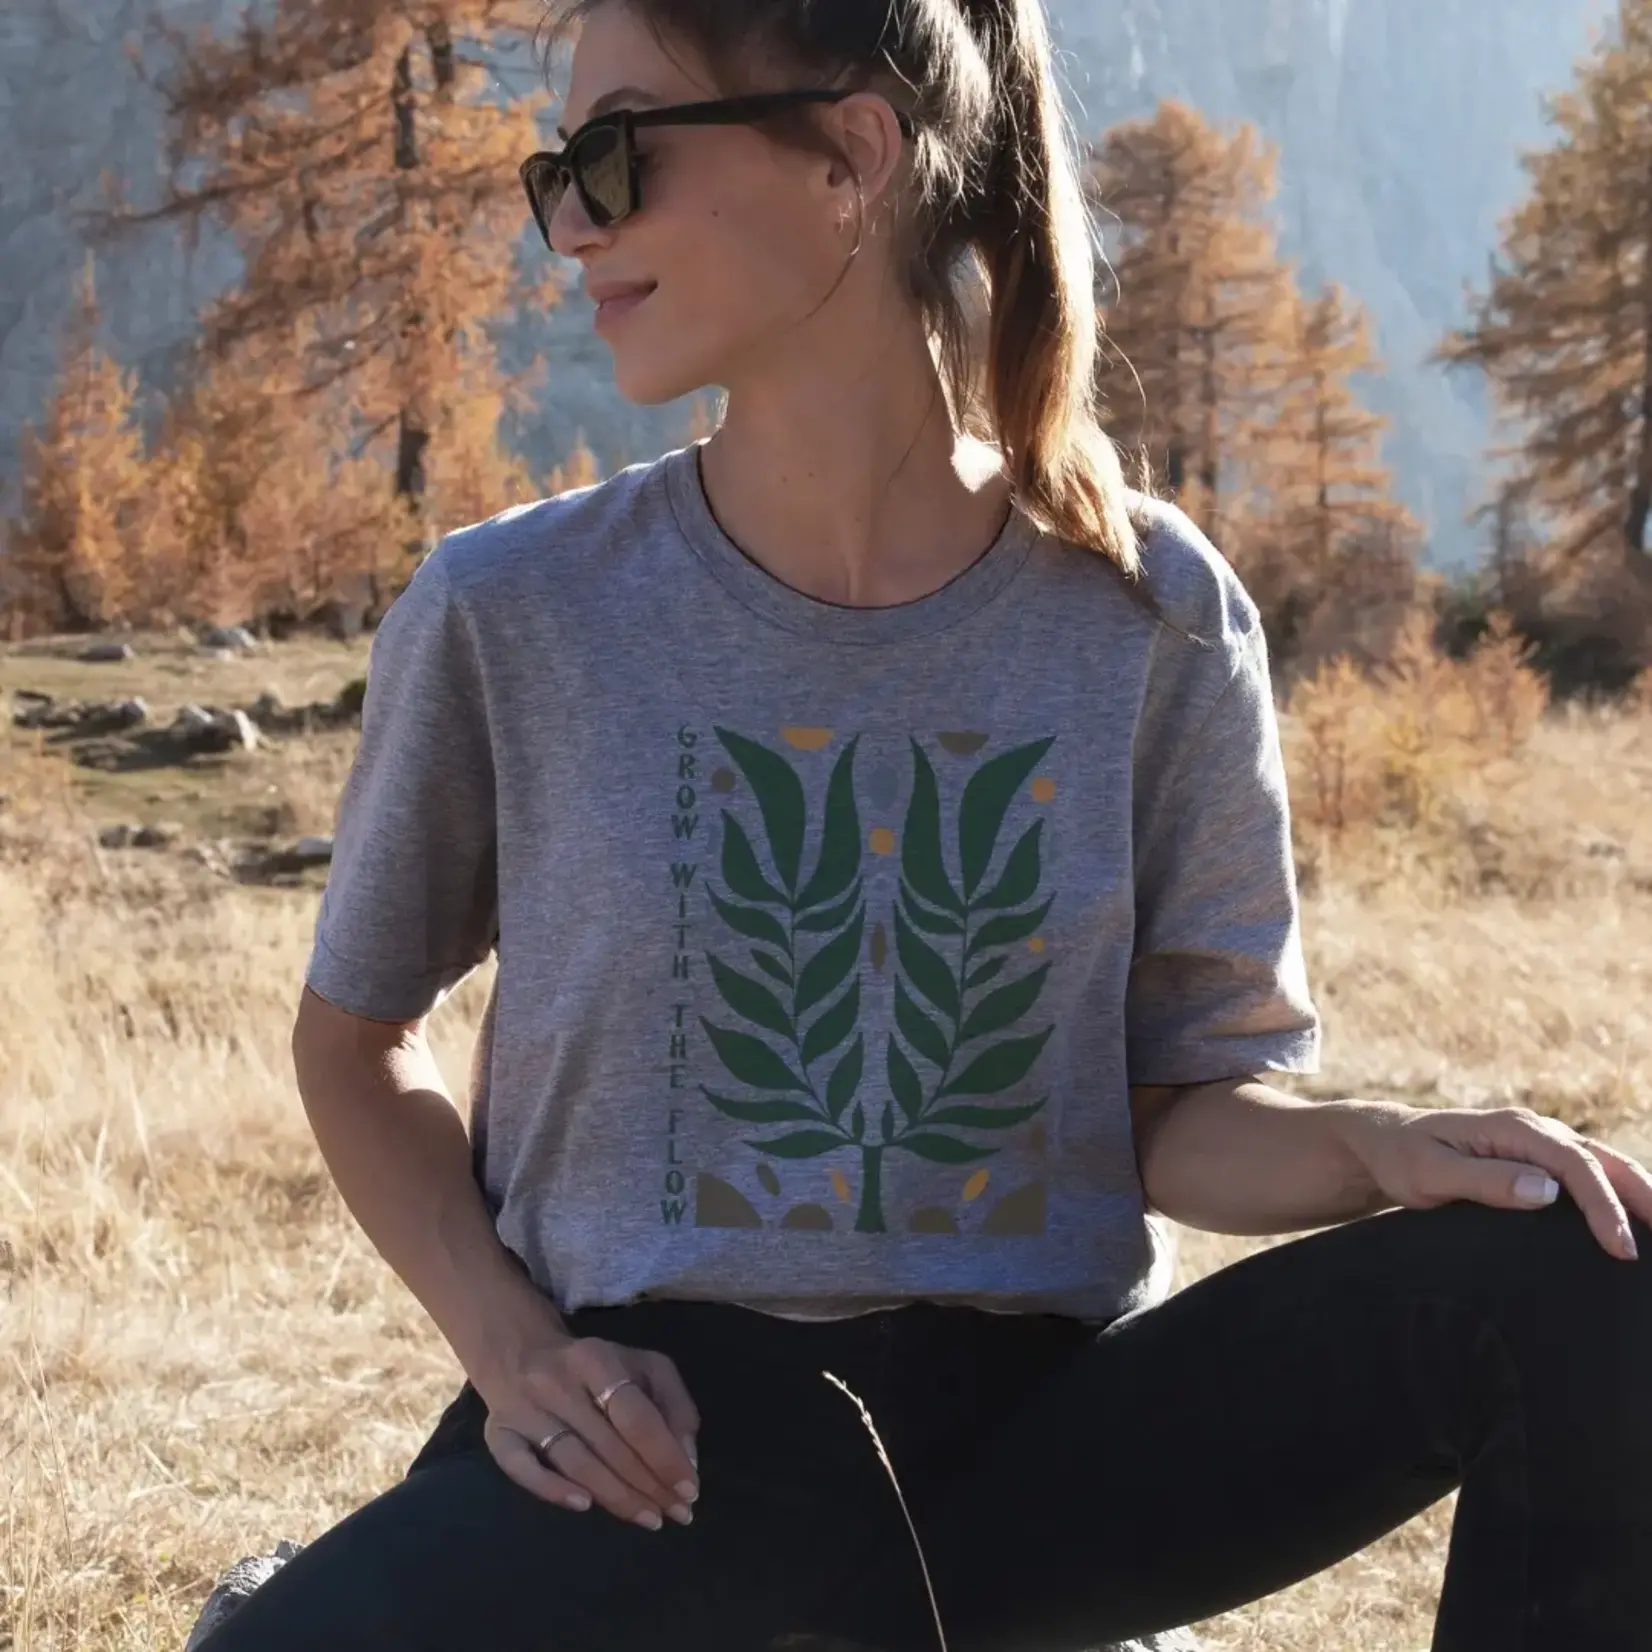 Rare Earth Co Grow With the Flow T-Shirt